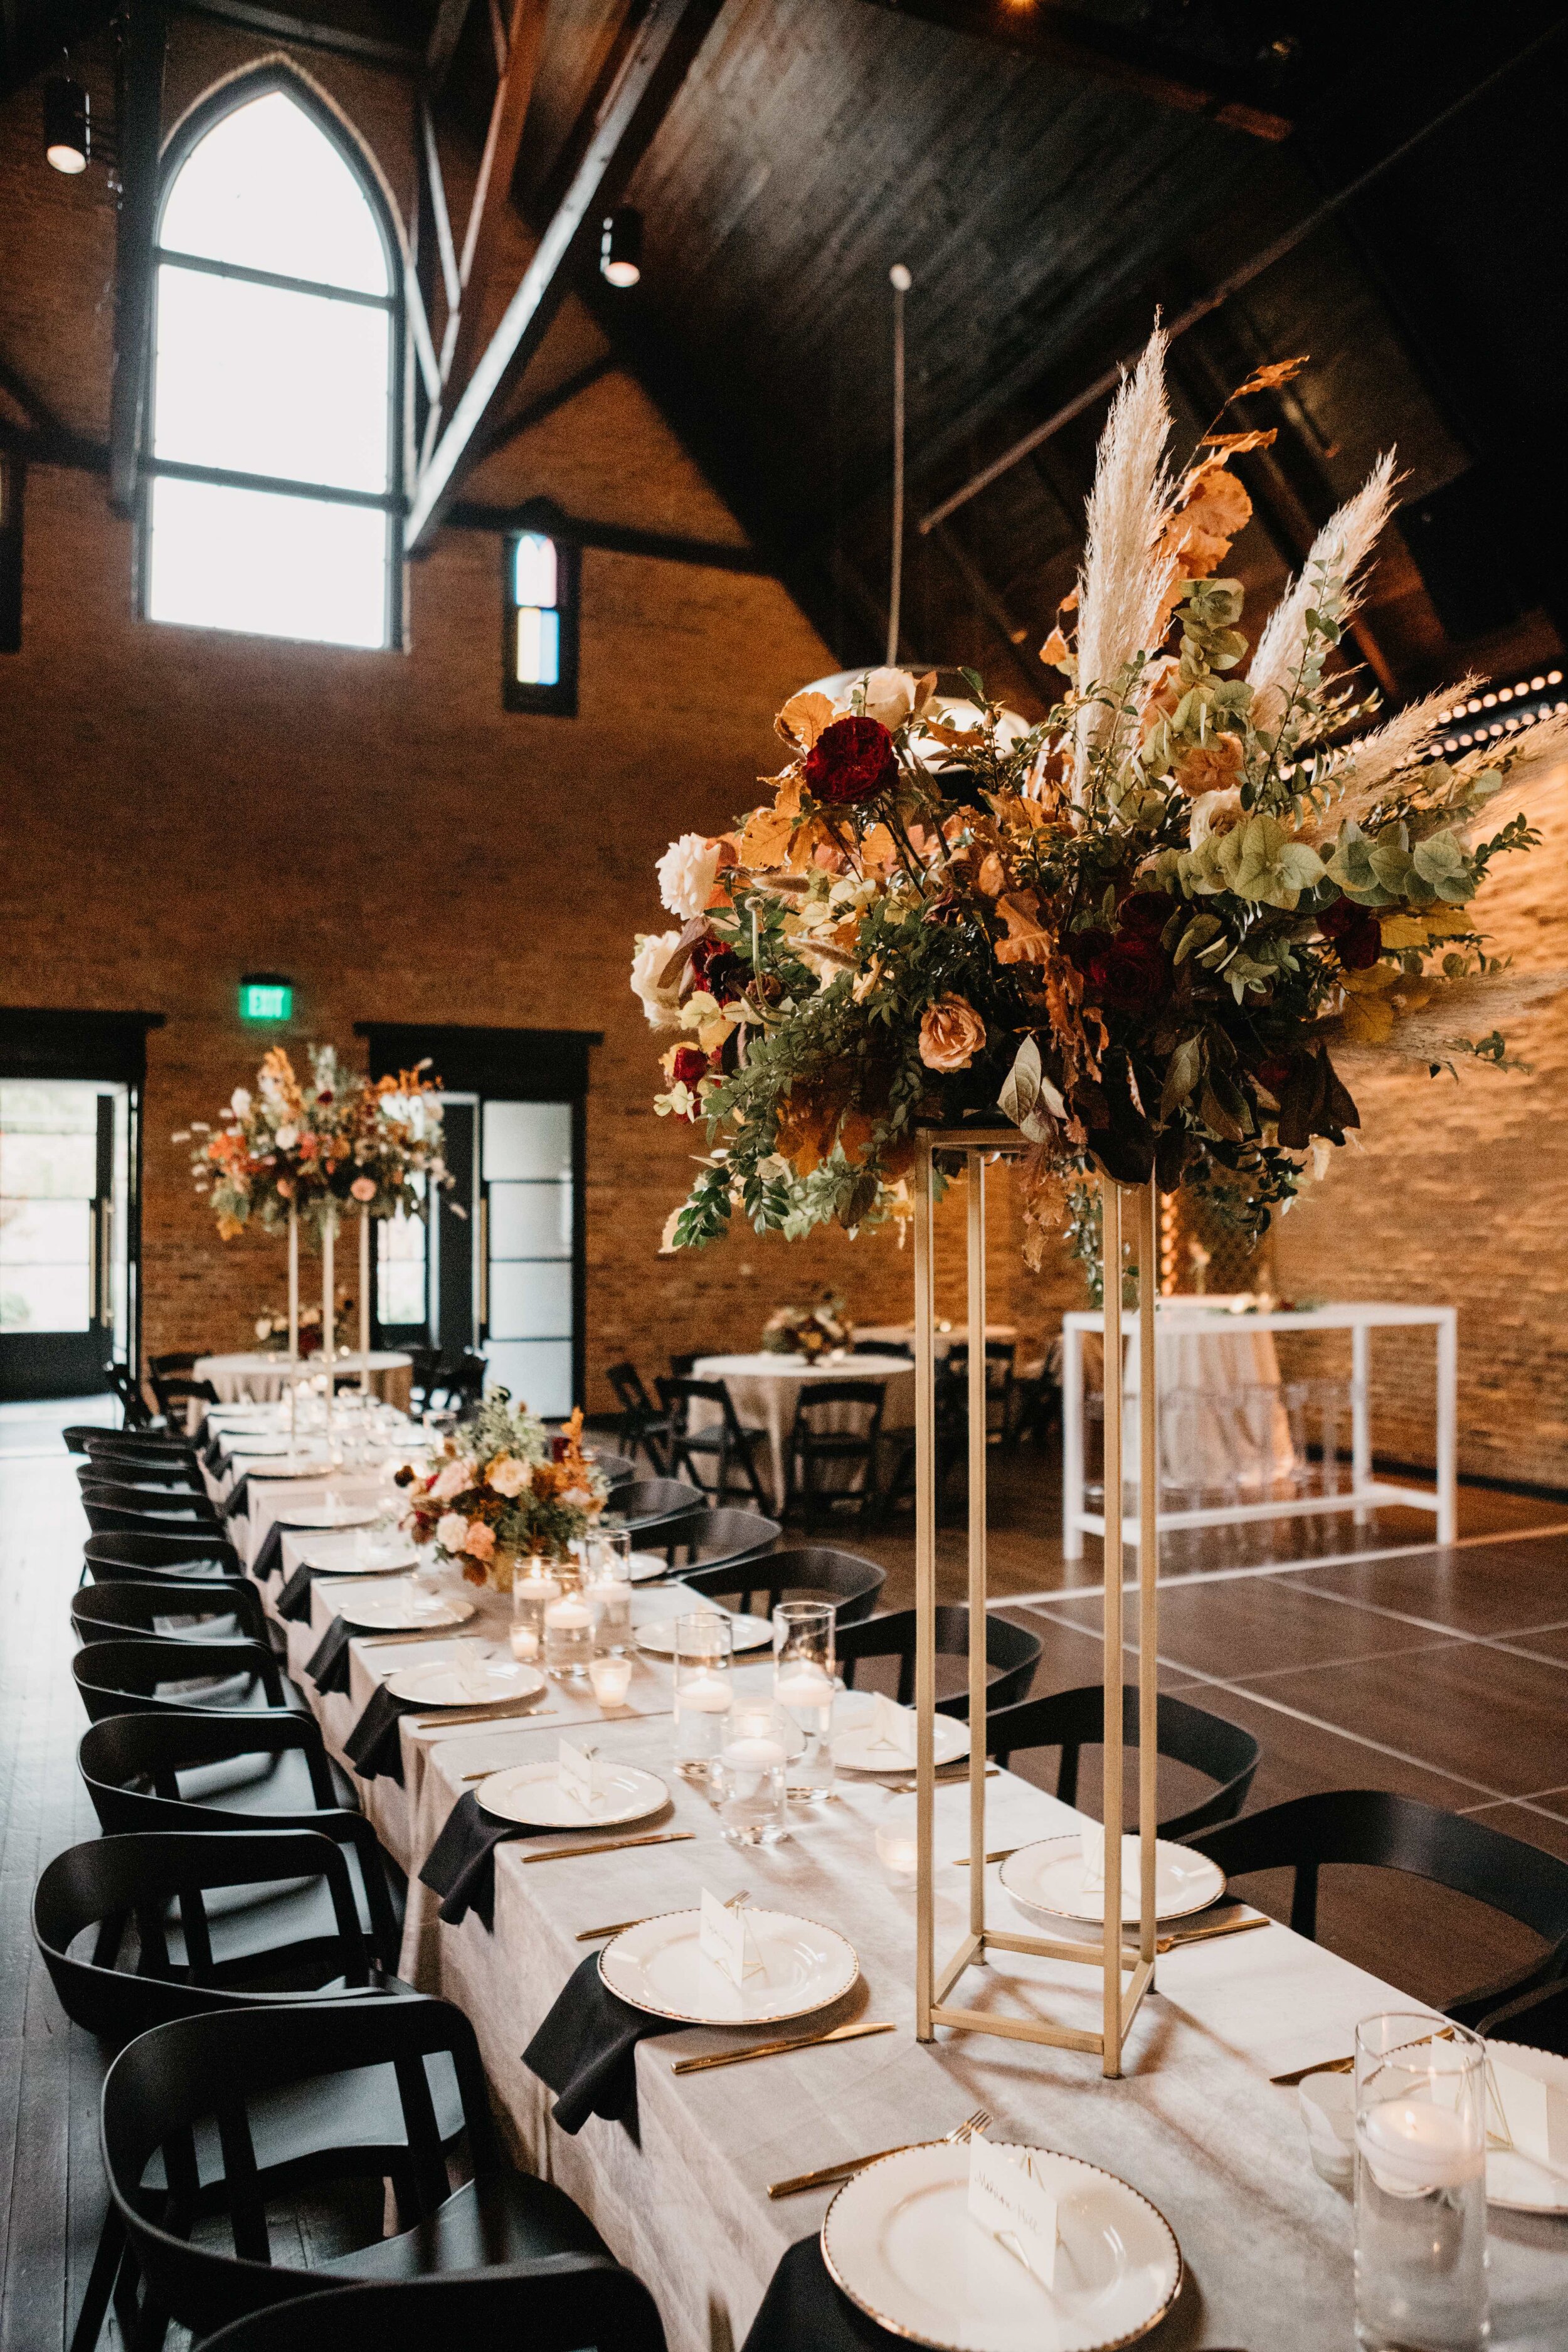 Modern gold stand with lush, asymmetrical floral arrangements using copper beech, pampas grass, garden roses, dahlias, and ranunculus in shades on rusty orange, burgundy, and muted earth tones. Nashville wedding floral design at Clementine.